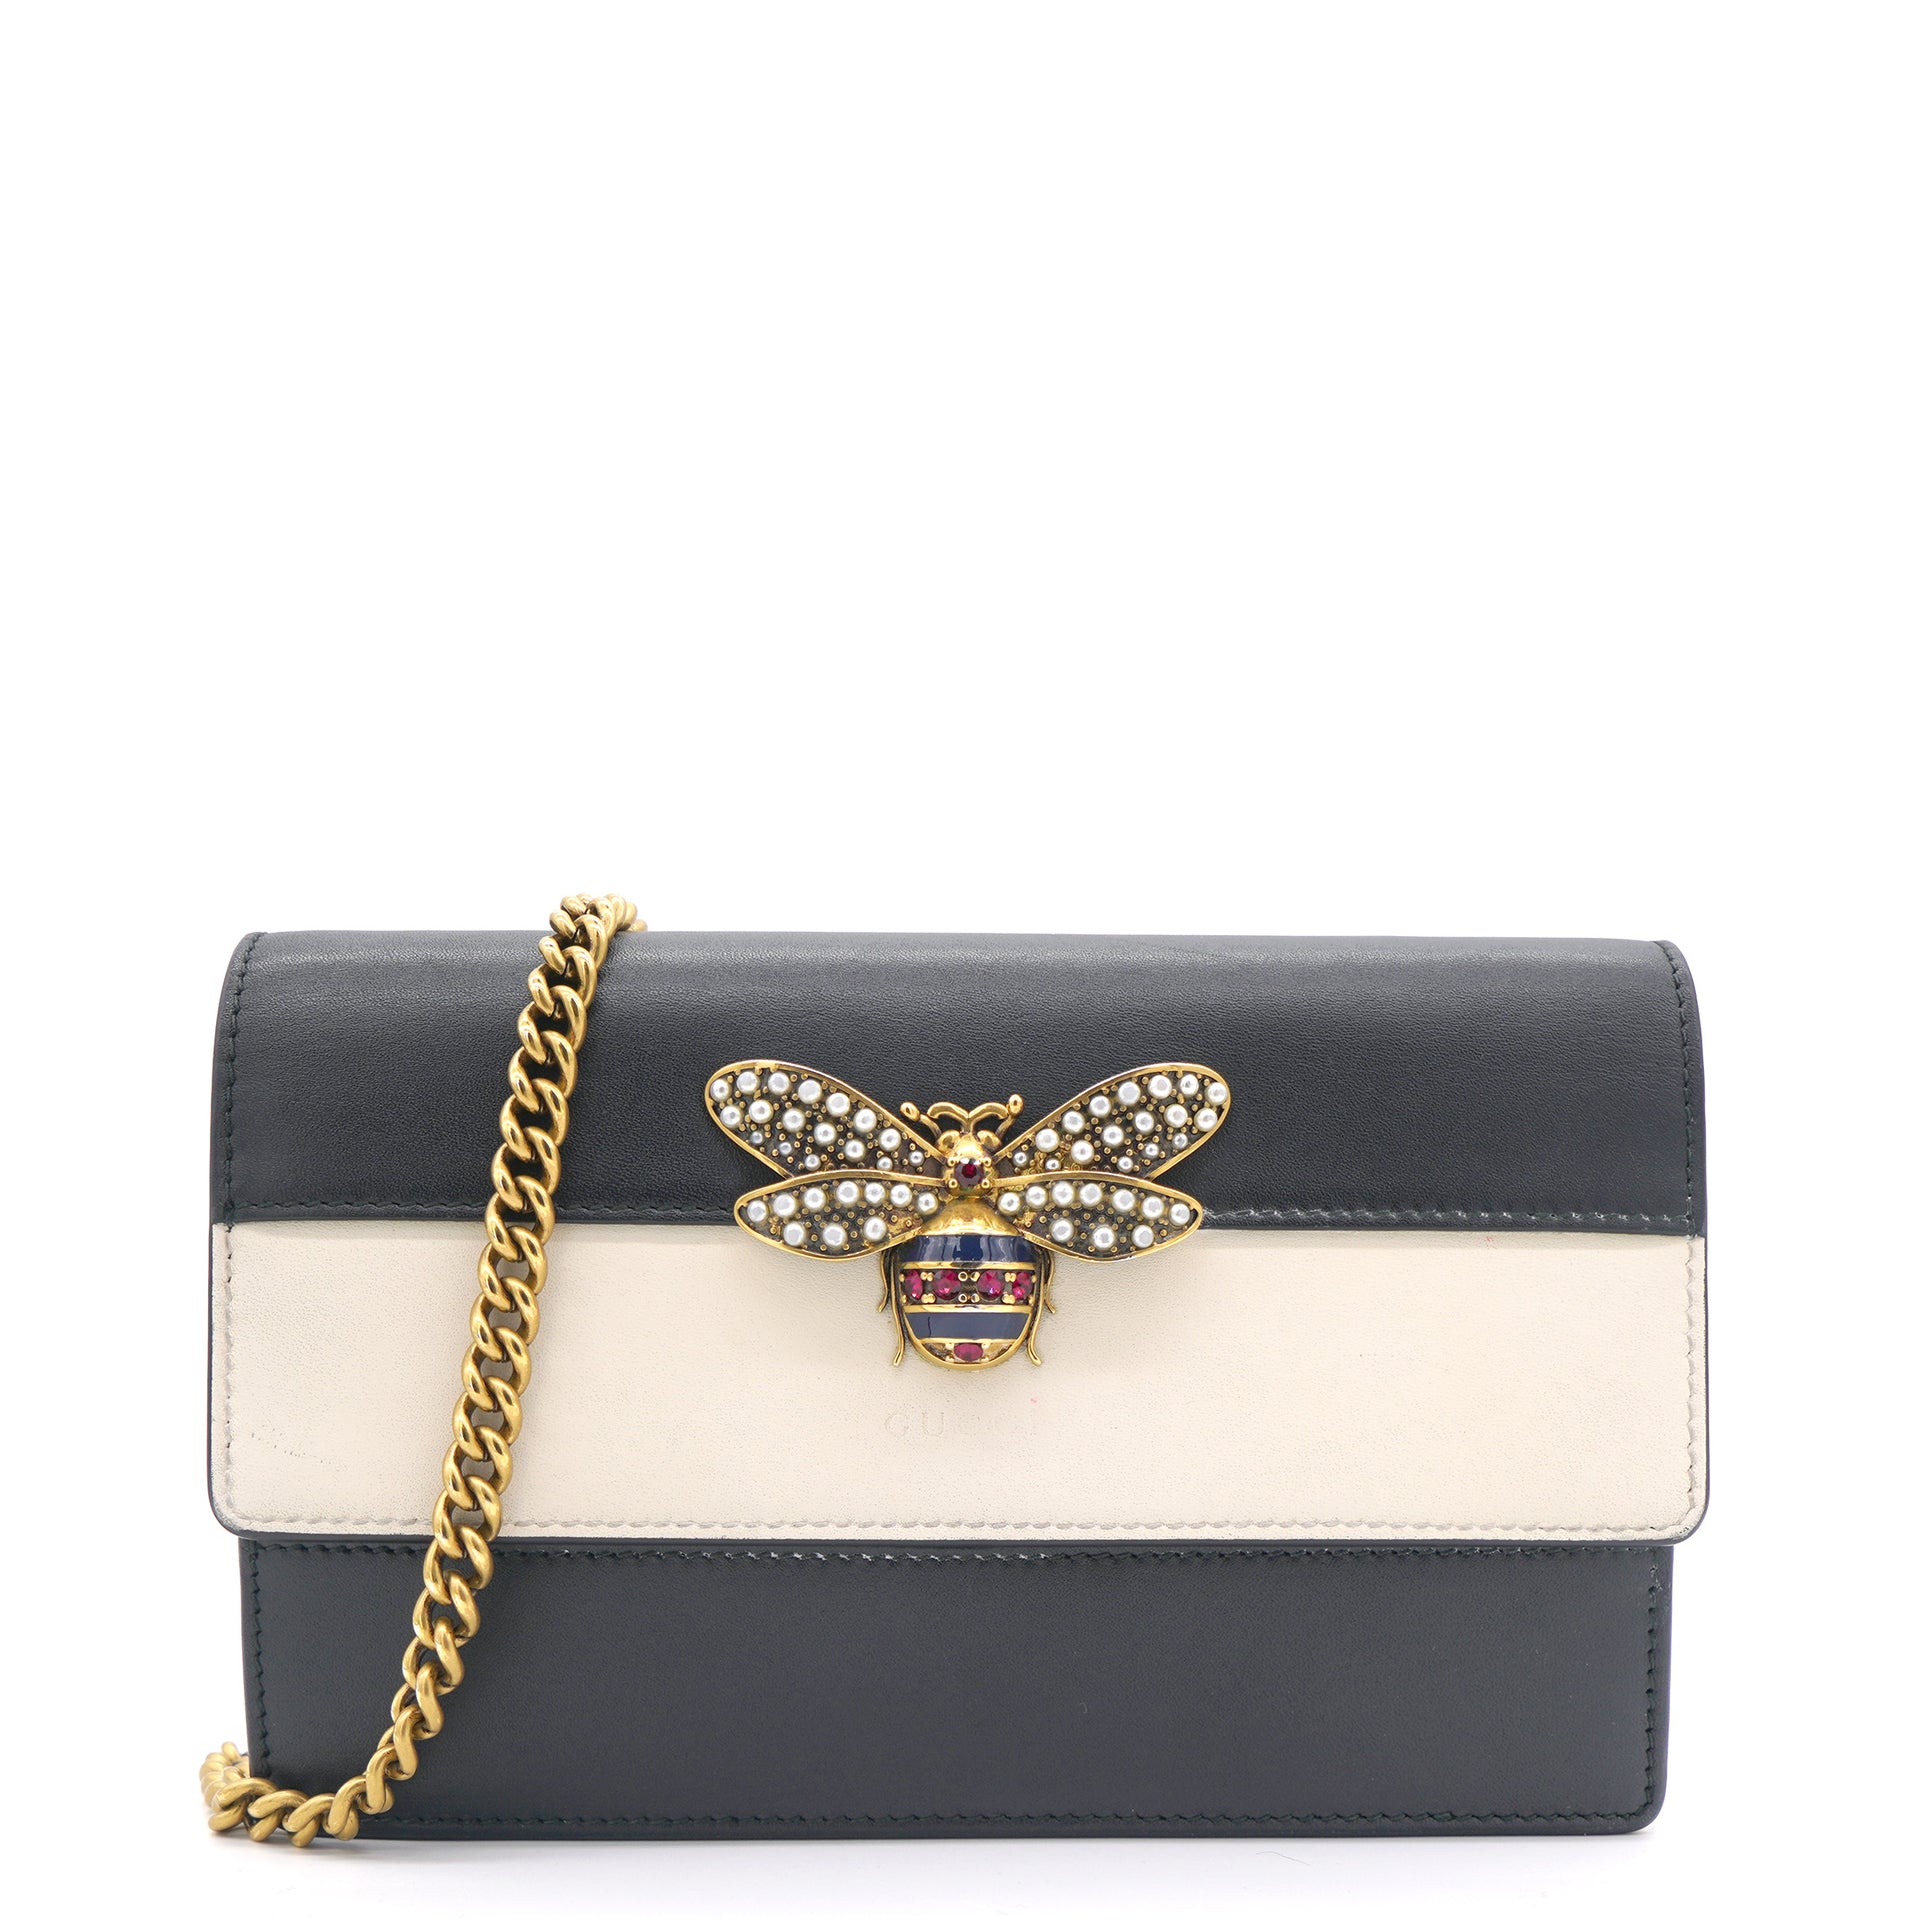 GUCCI Marmont Wallet Chain Bag - Black - Adorn Collection